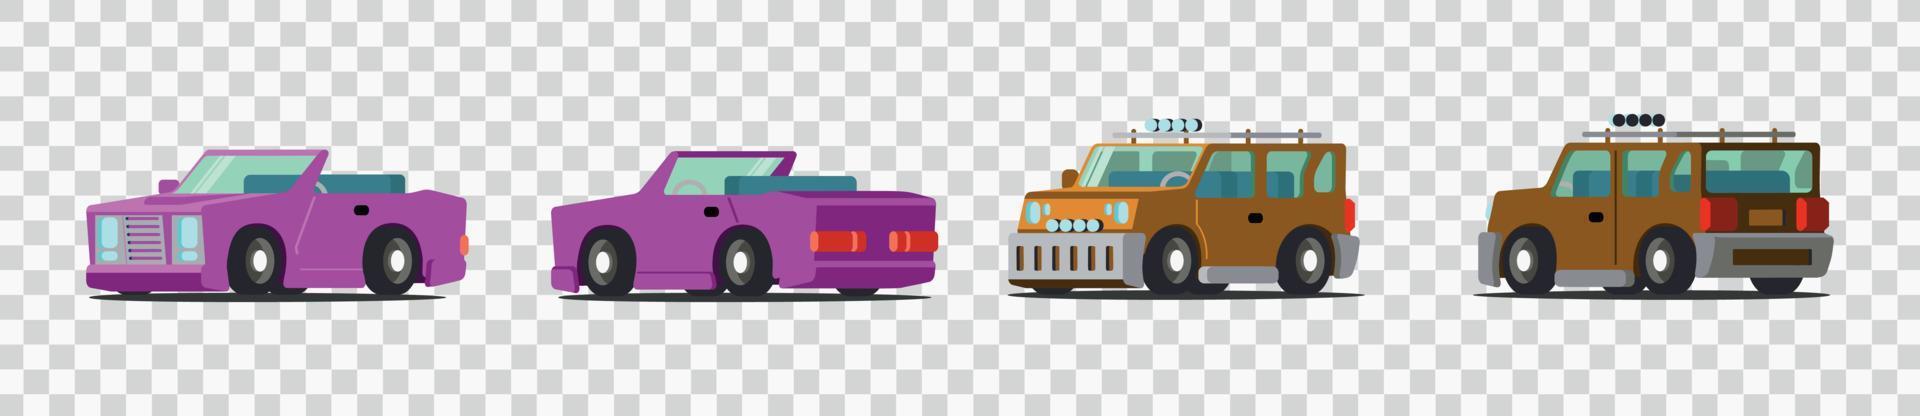 set of transports icons vector eps 10